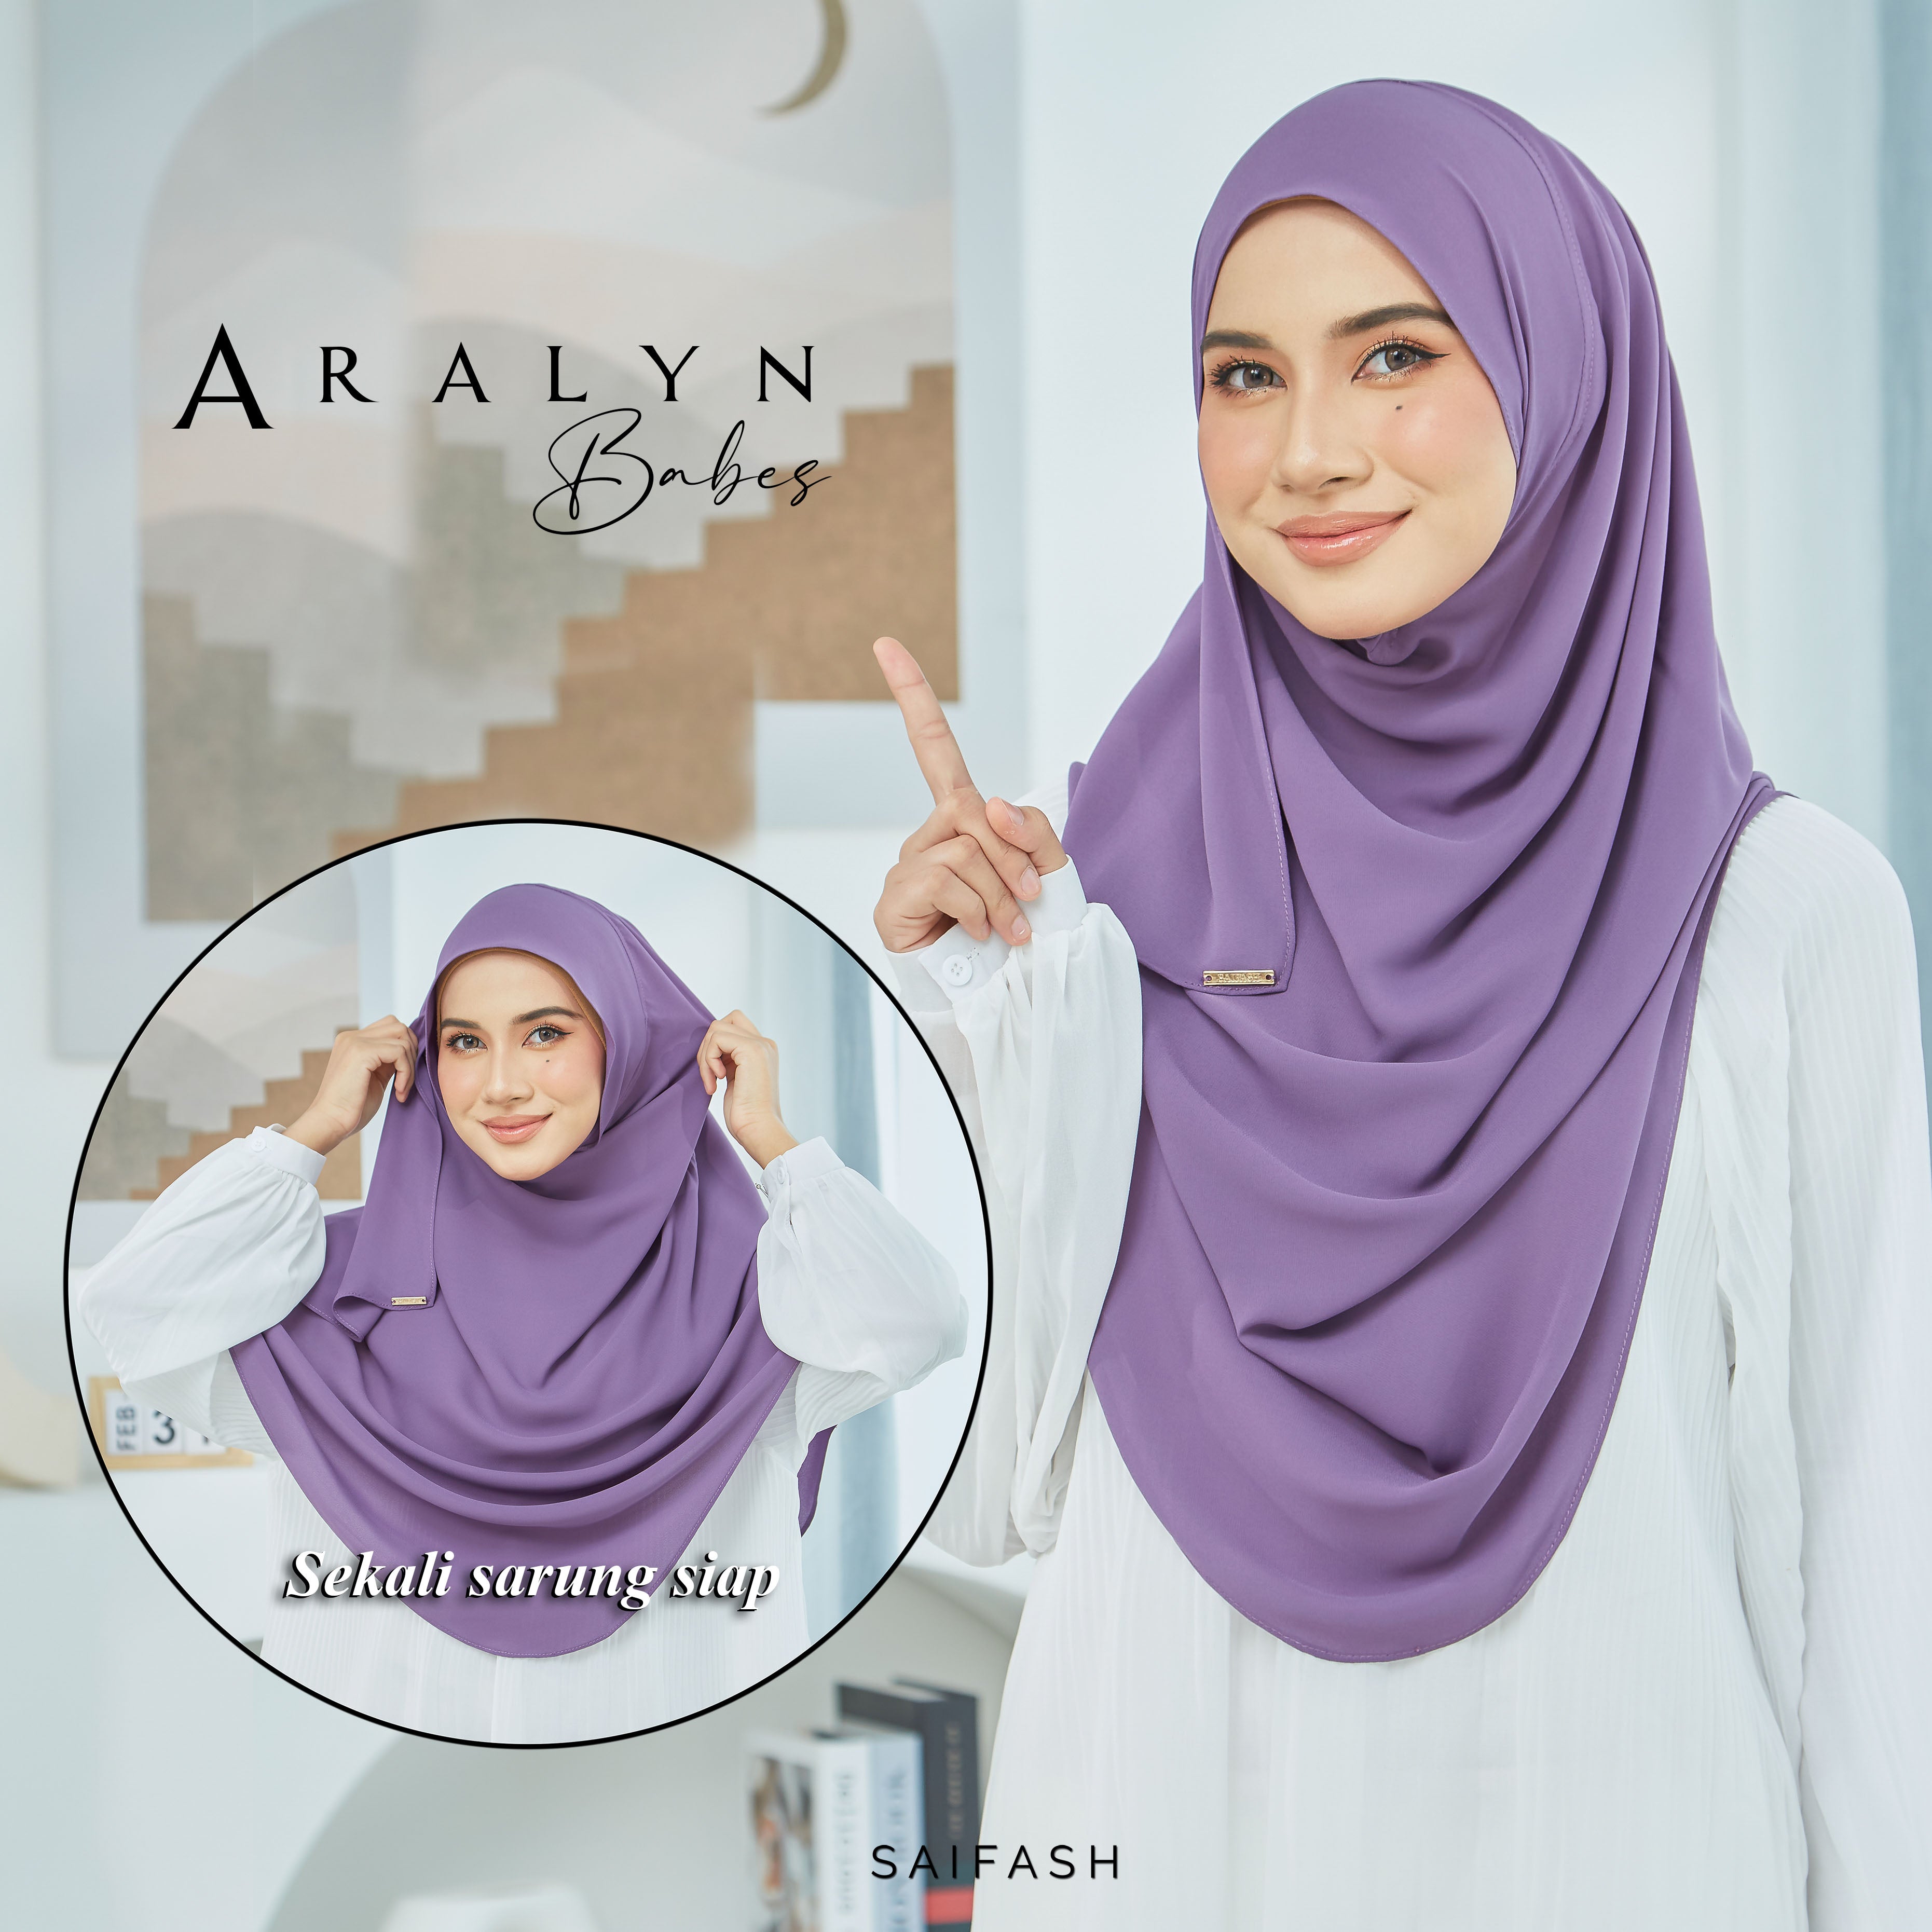 Aralyn Babes Instant Hijab in Milo